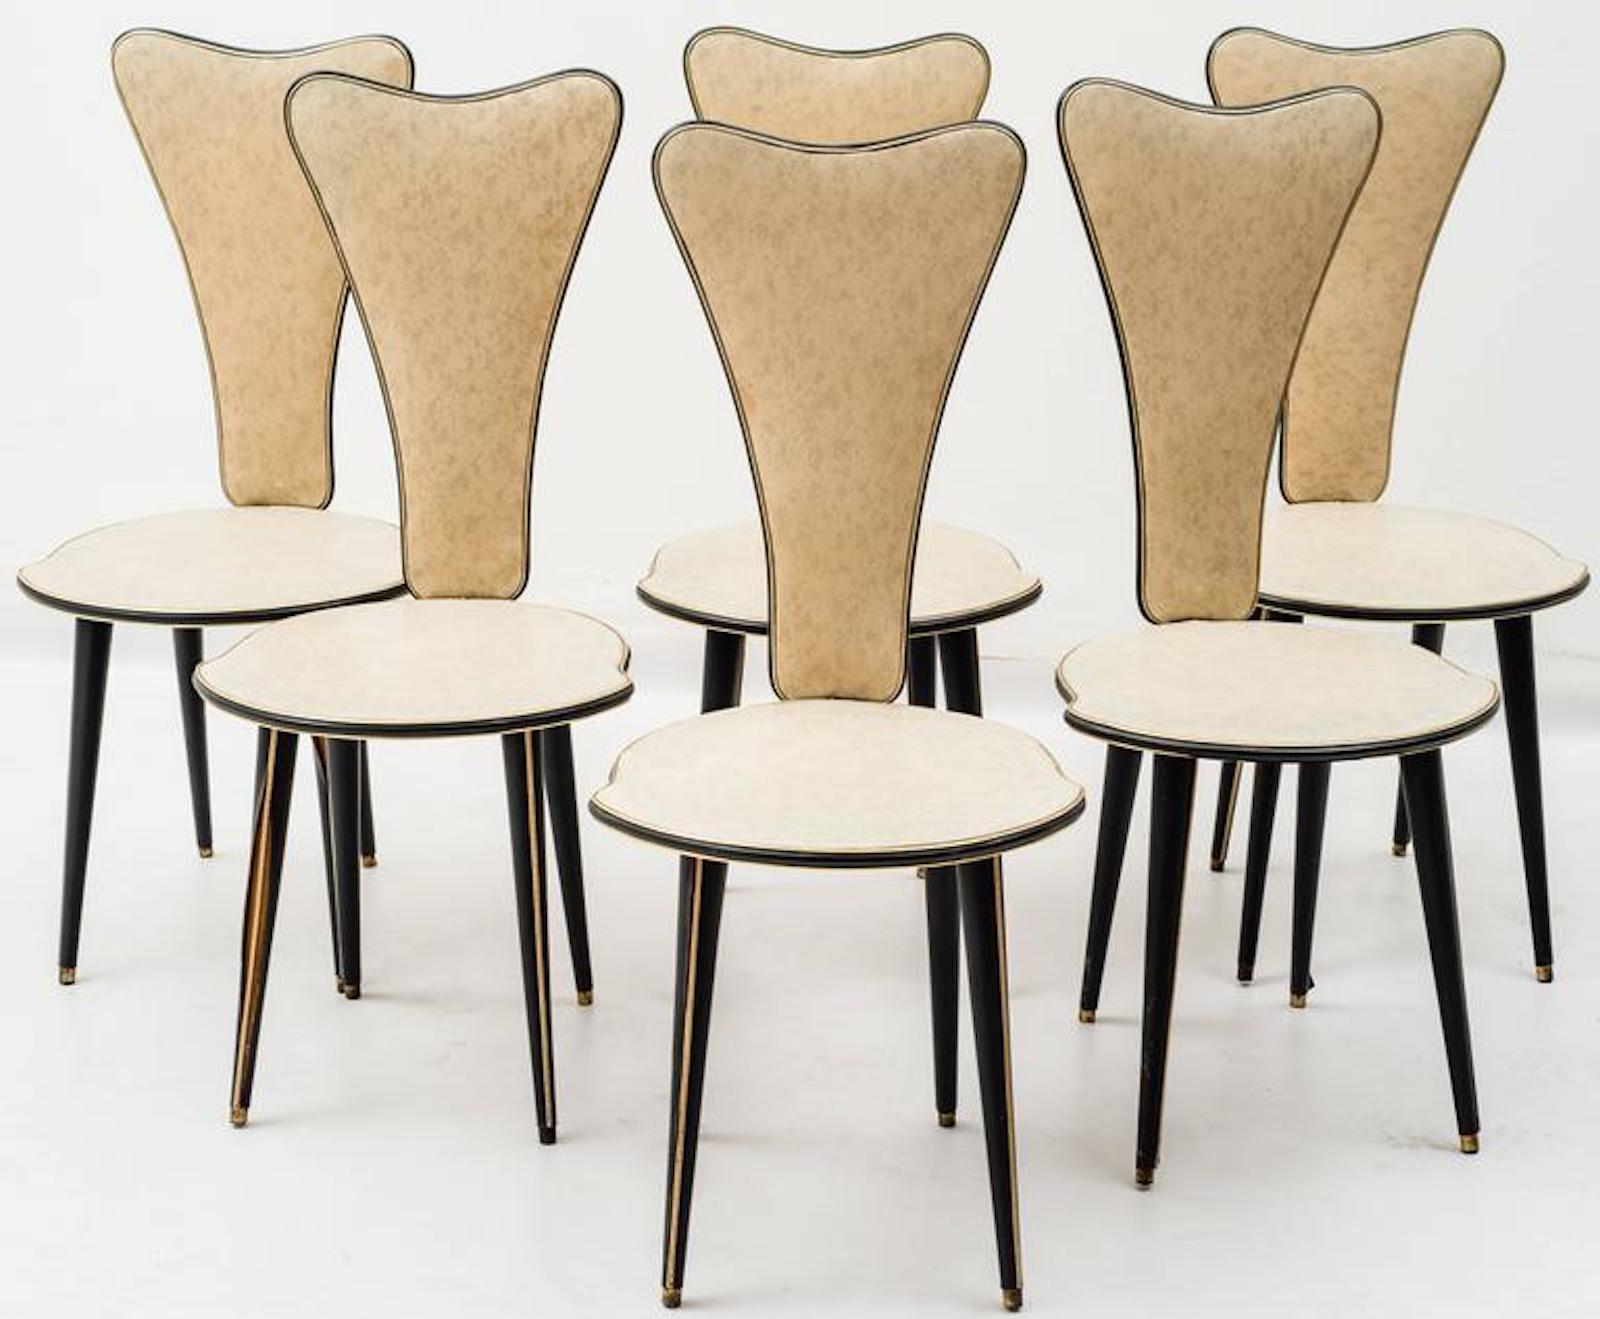 Mid-20th Century Set of Six Chairs by Umberto Mascagni, 1950s For Sale